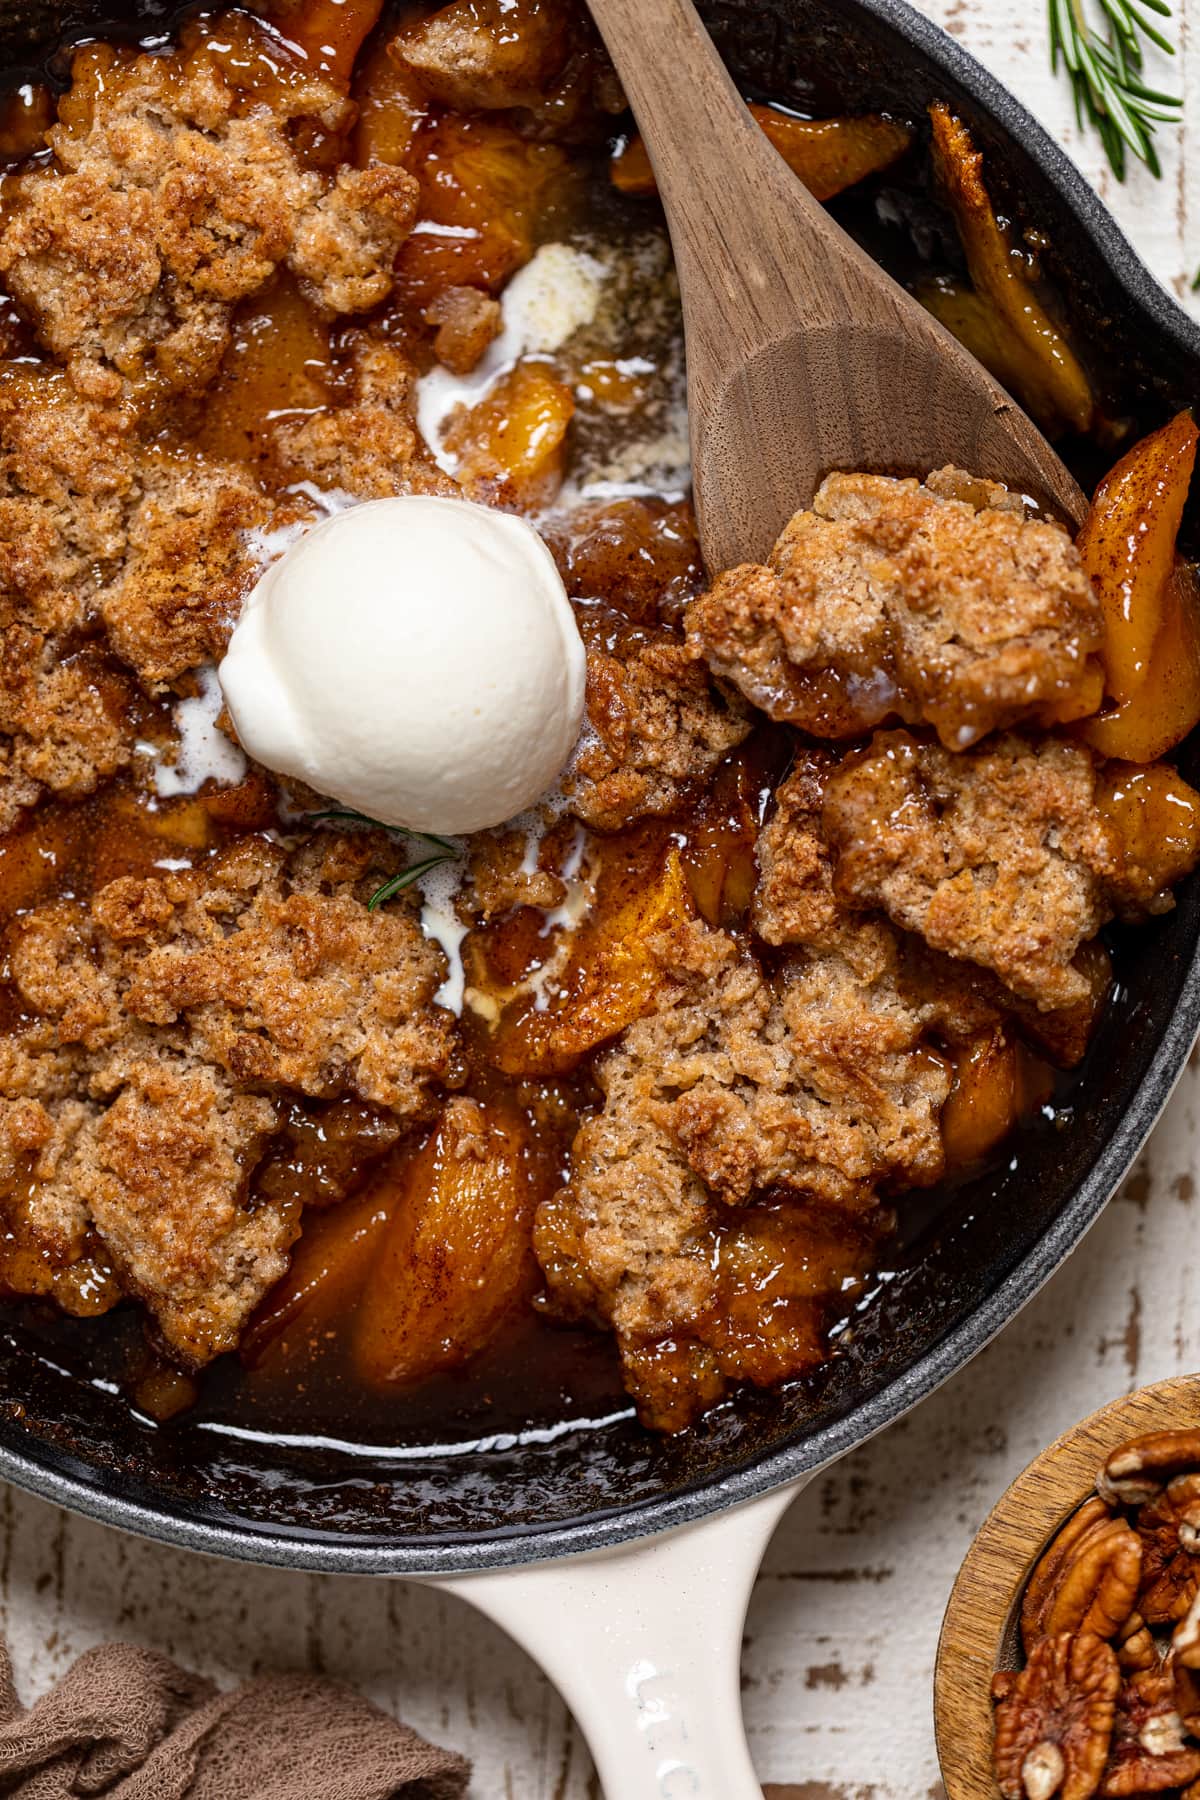 Wooden spoon scooping Vegan Southern Peach Cobbler from a skillet.